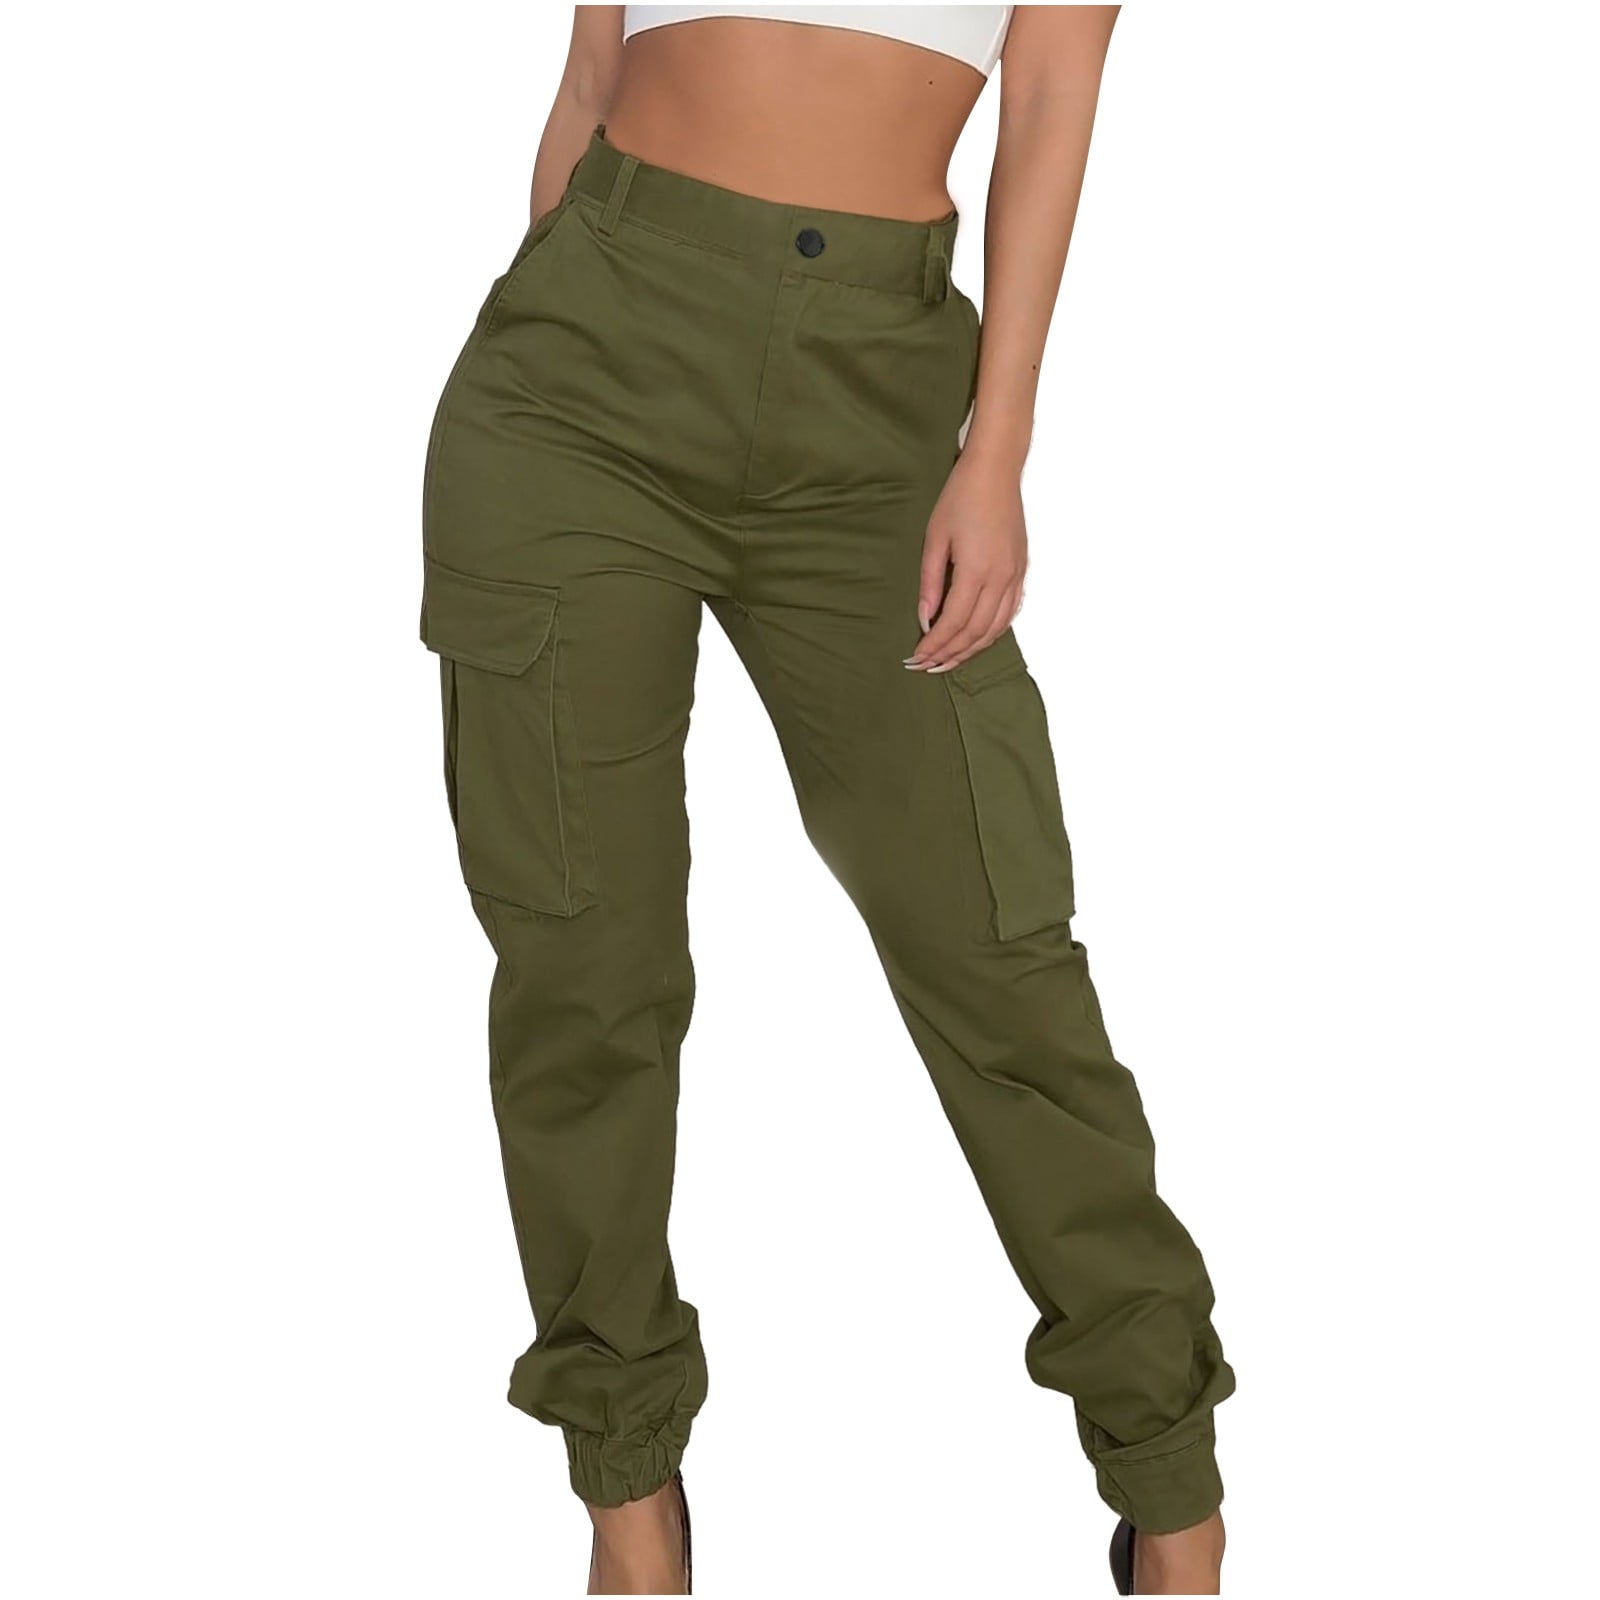 HAPIMO Sales Cargo Pants for Women Teens Fall Fashion Outfits